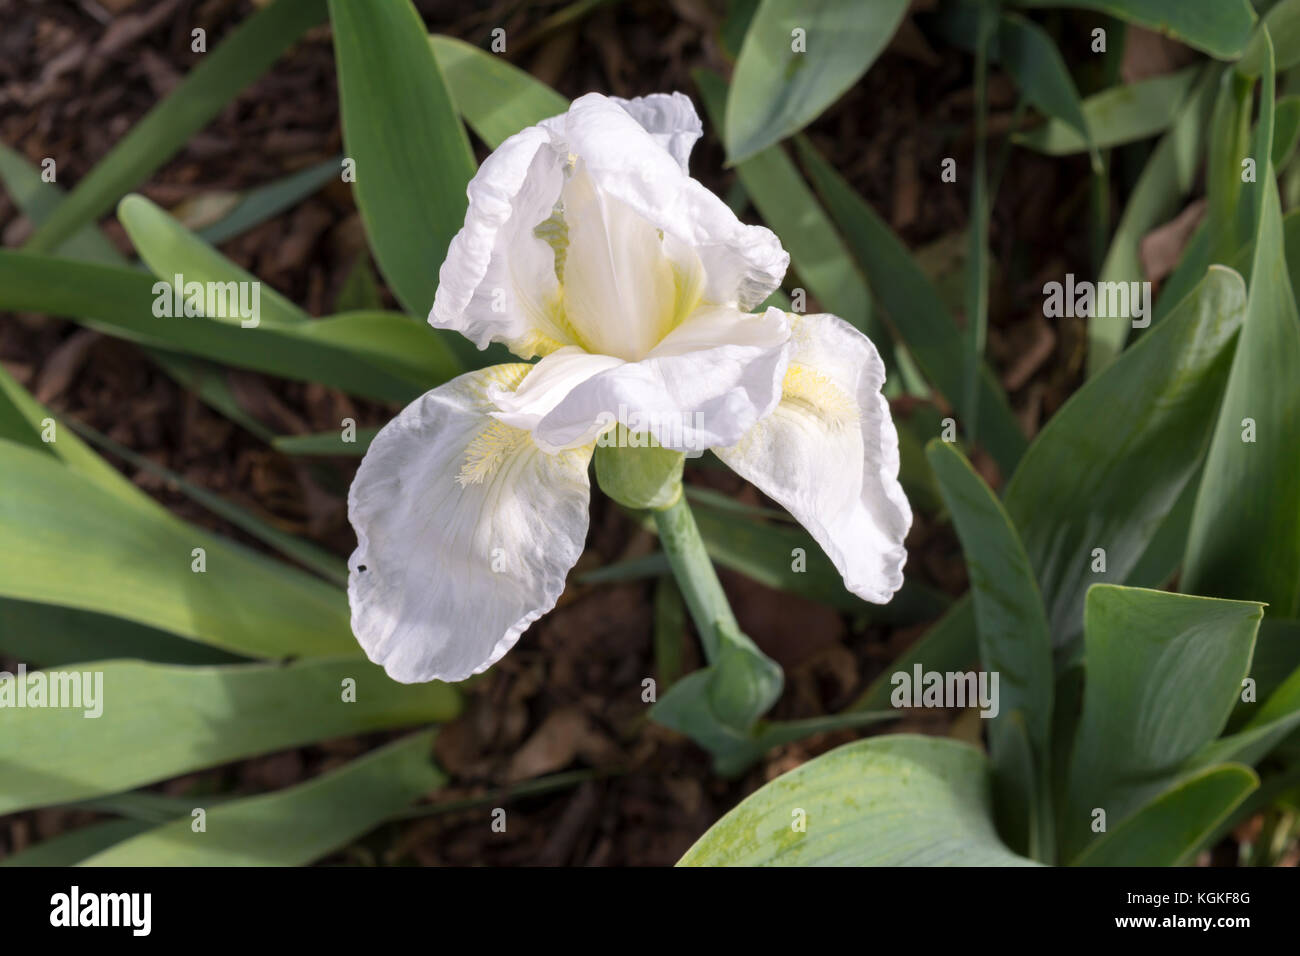 A single bearded white iris with a yellow beard growing in the garden, possibly a Frequent Flyer Iris Stock Photo